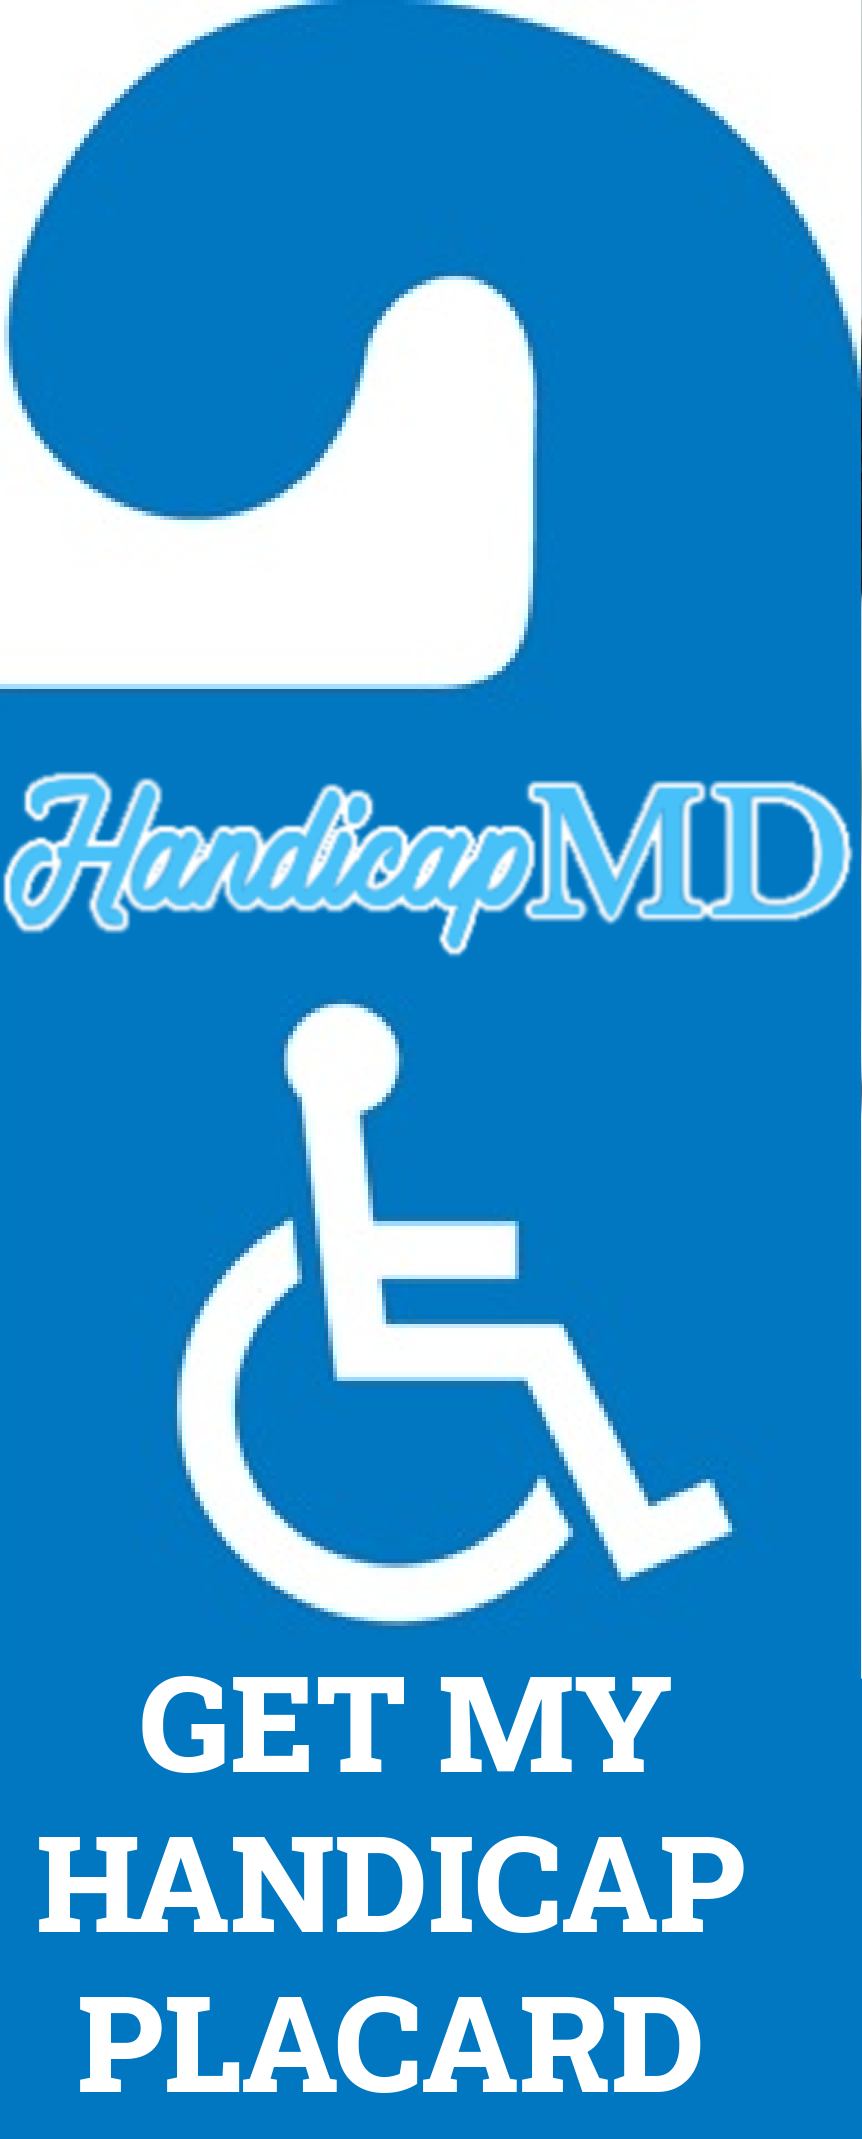 How To Get A Handicap Parking Placard Renewal in Arizona